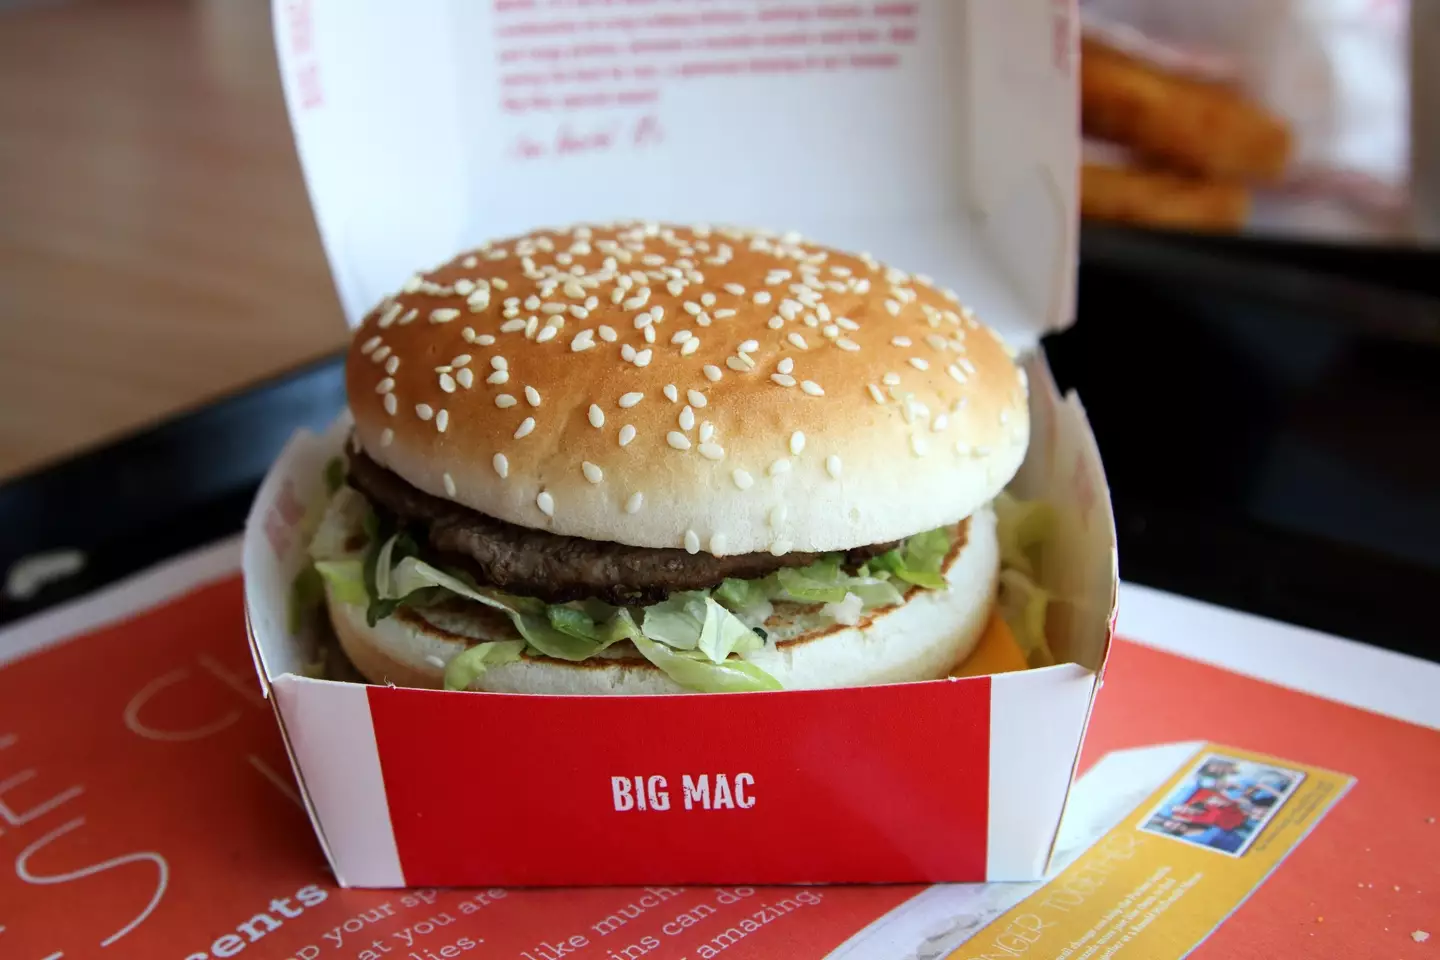 You'll be paid to eat various fast food meals, including a Big Mac.